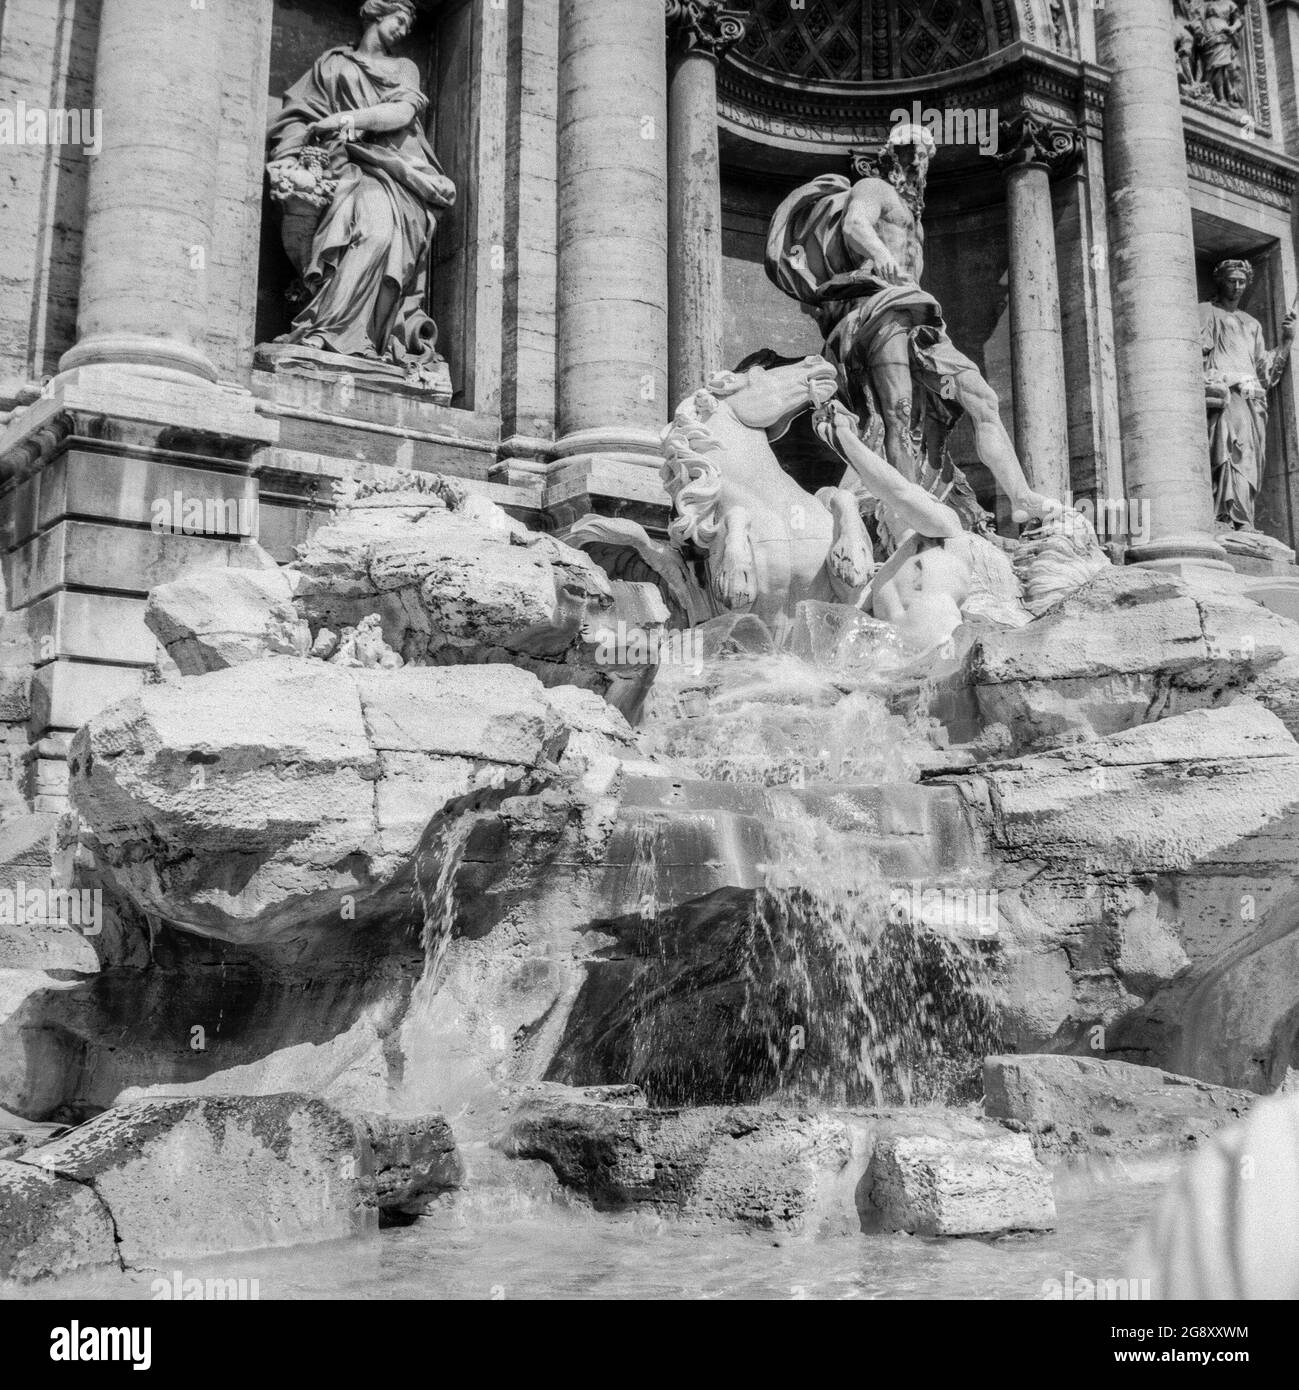 Rome, 1972: detail of the left side of famous Trevi Fountain, made famous in Fellini's film "La dolce vita", with the bathroom scene of the actress Anita Ekberg Stock Photo